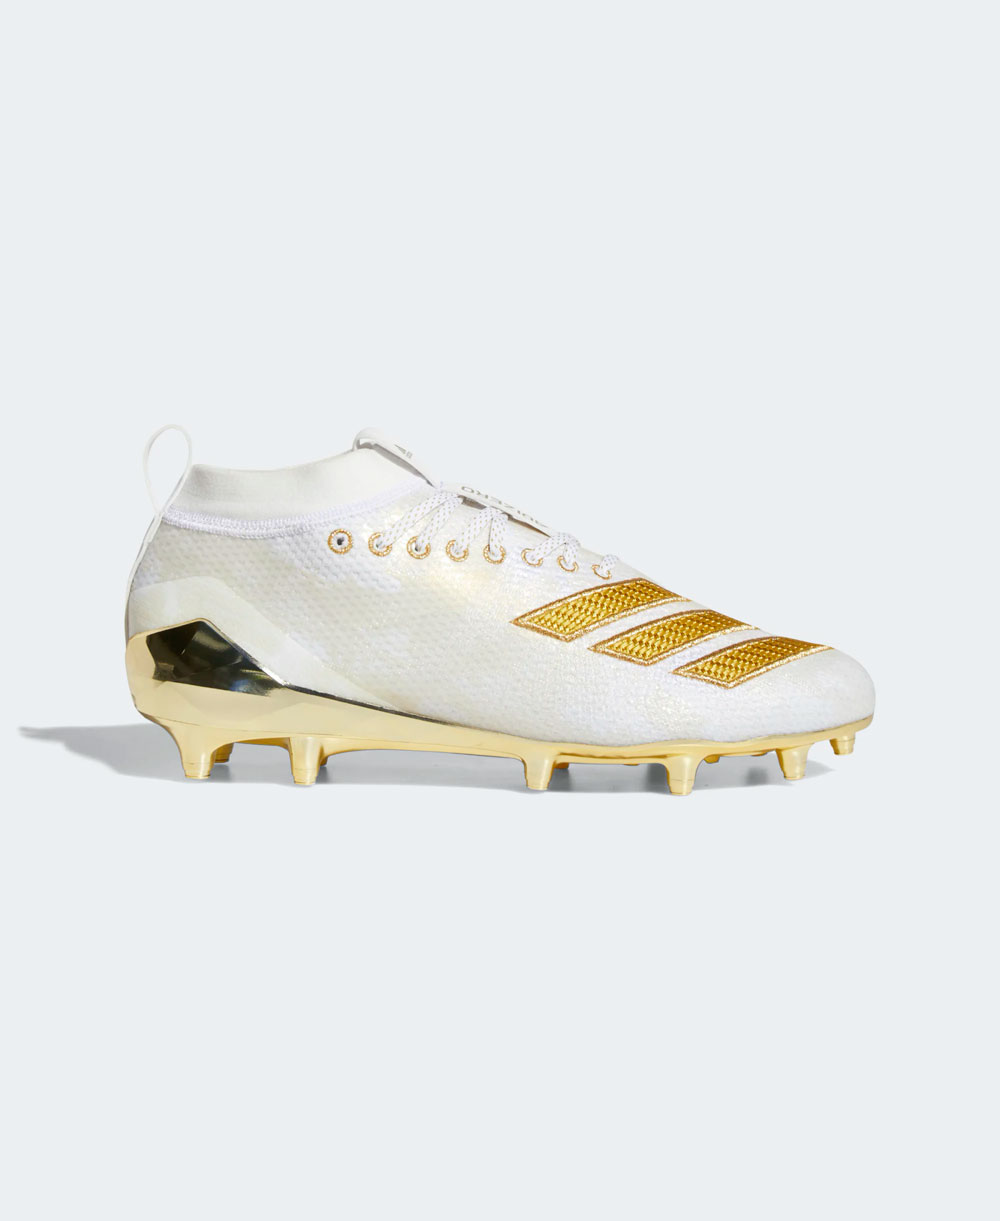 nike football cleats gold and white